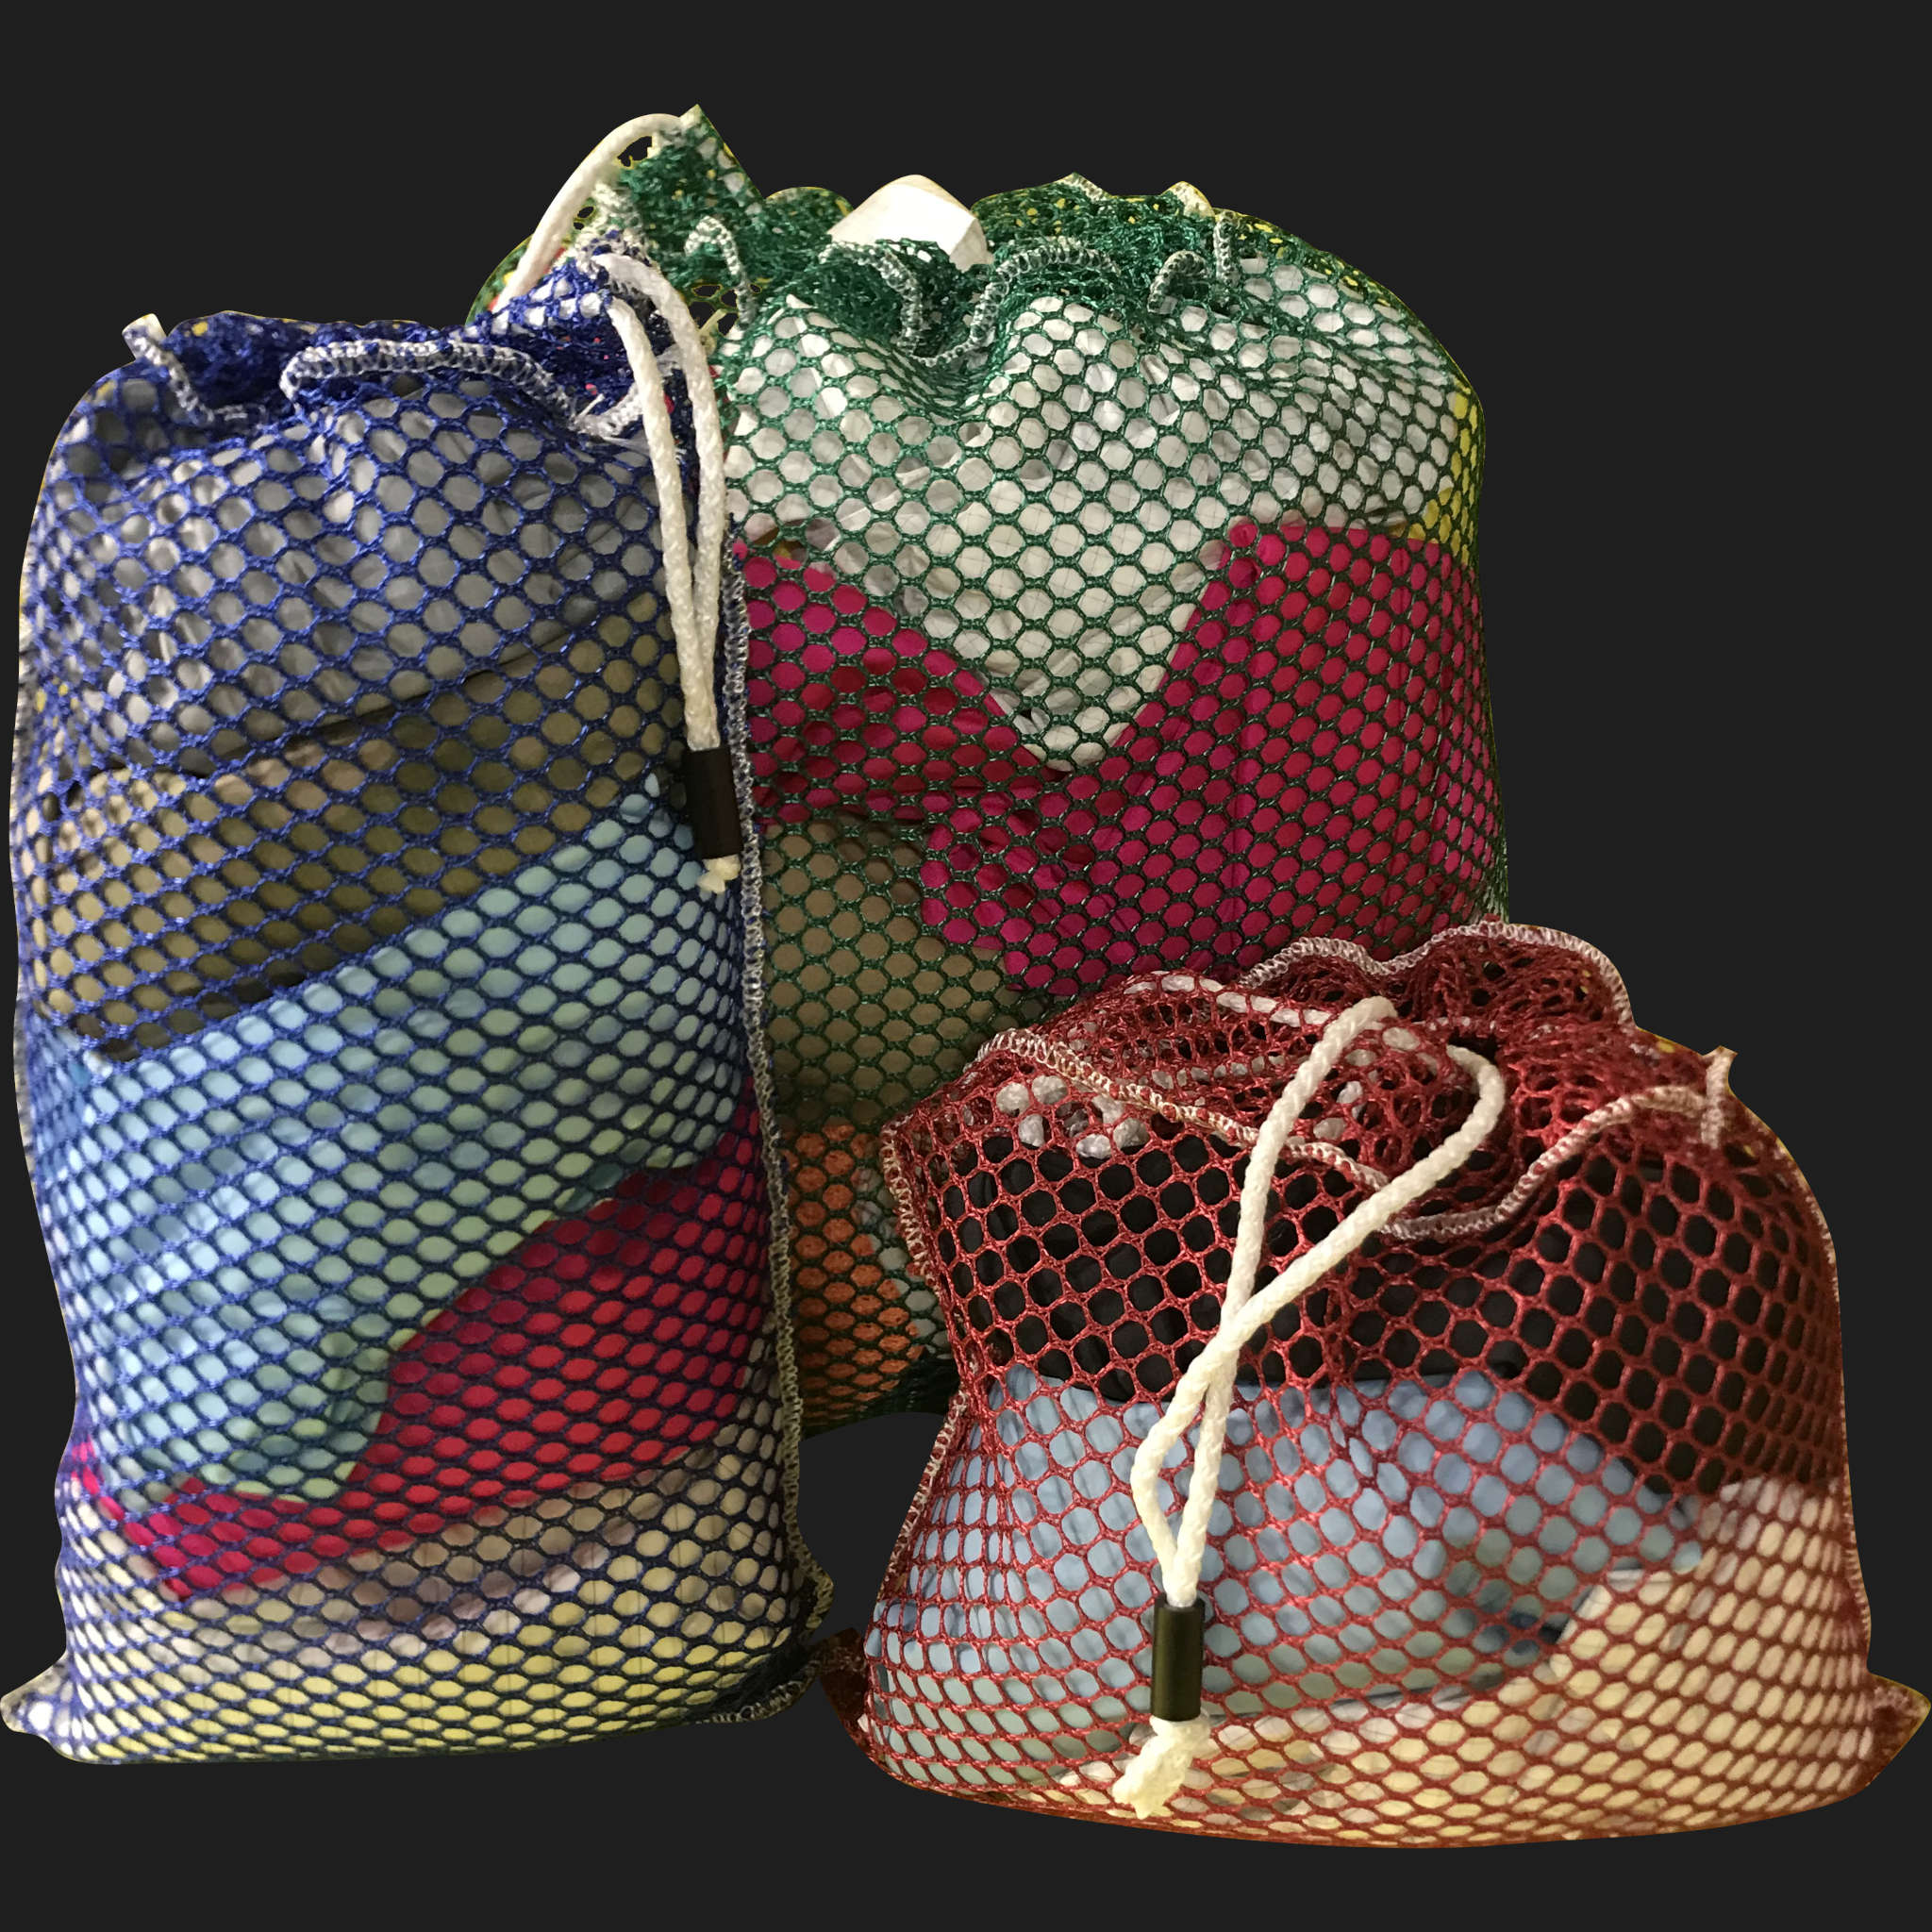 20" x 48" Customized Mesh-Net-Laundry Bags Heavy Duty with Cord and barrellock closure